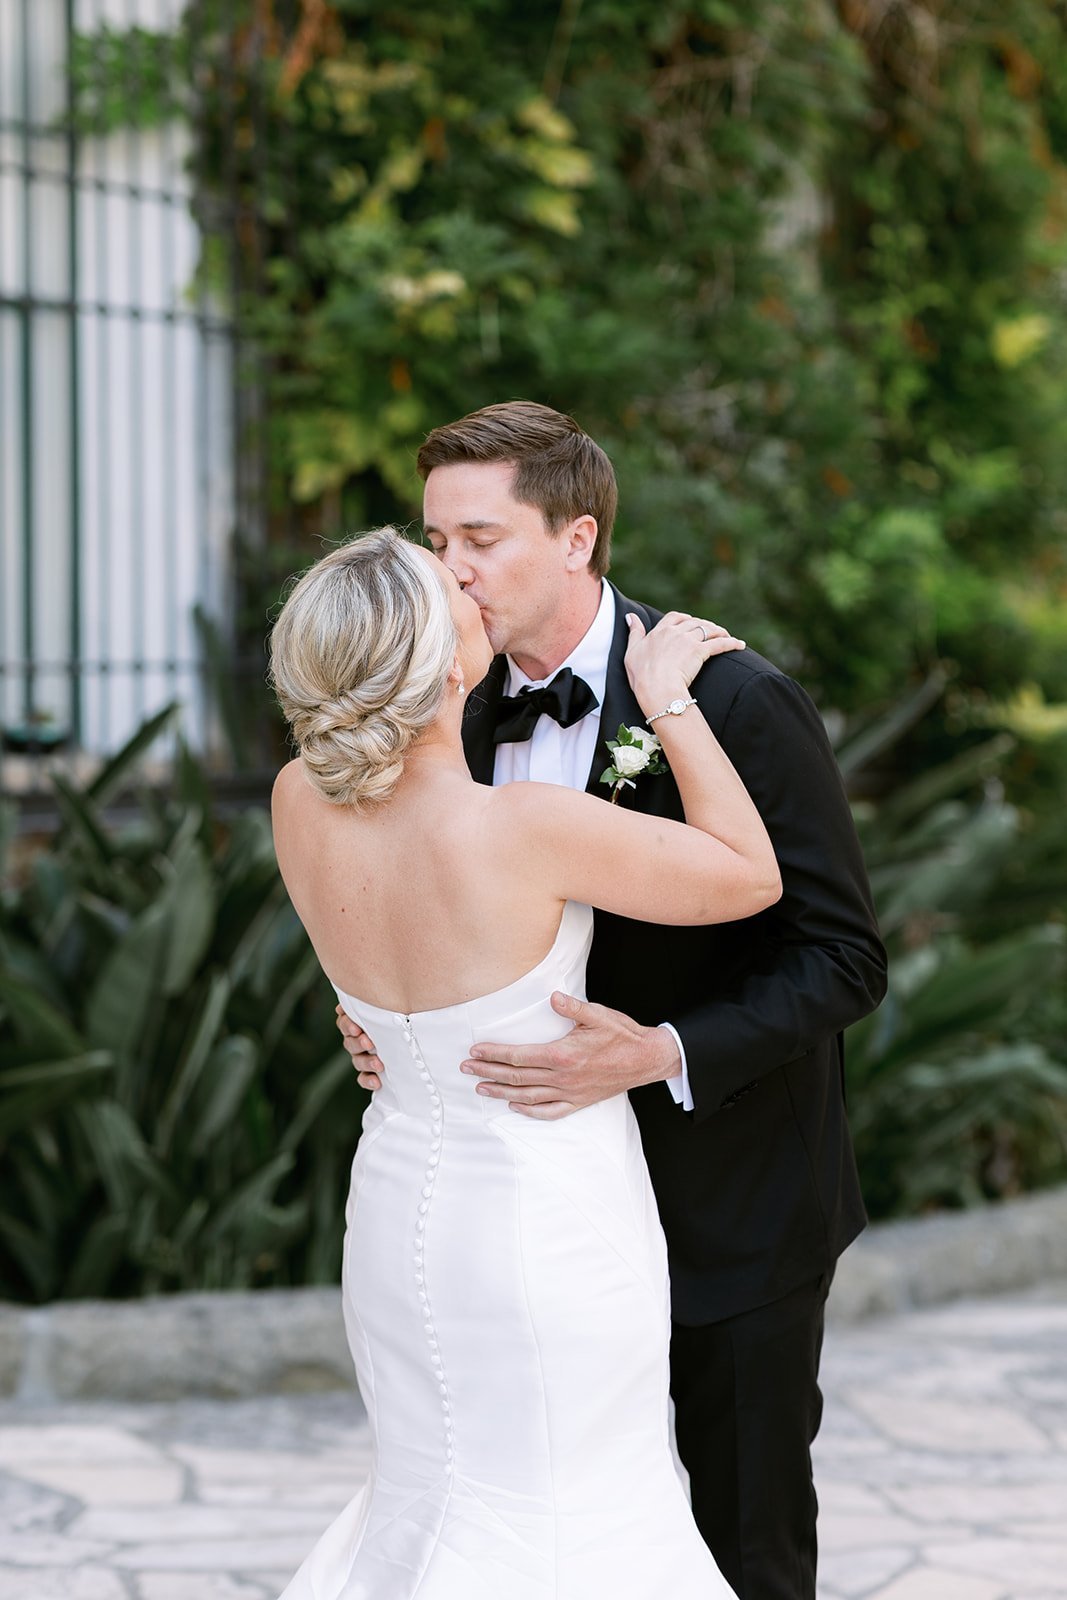 www.santabarbarawedding.com | Santa Barbara Courthouse | Amazing Days Events | Anna Delores Photography | Blushing Beauty | Anne Barge | Anna Le Pley Taylor | Bride and Groom First Look